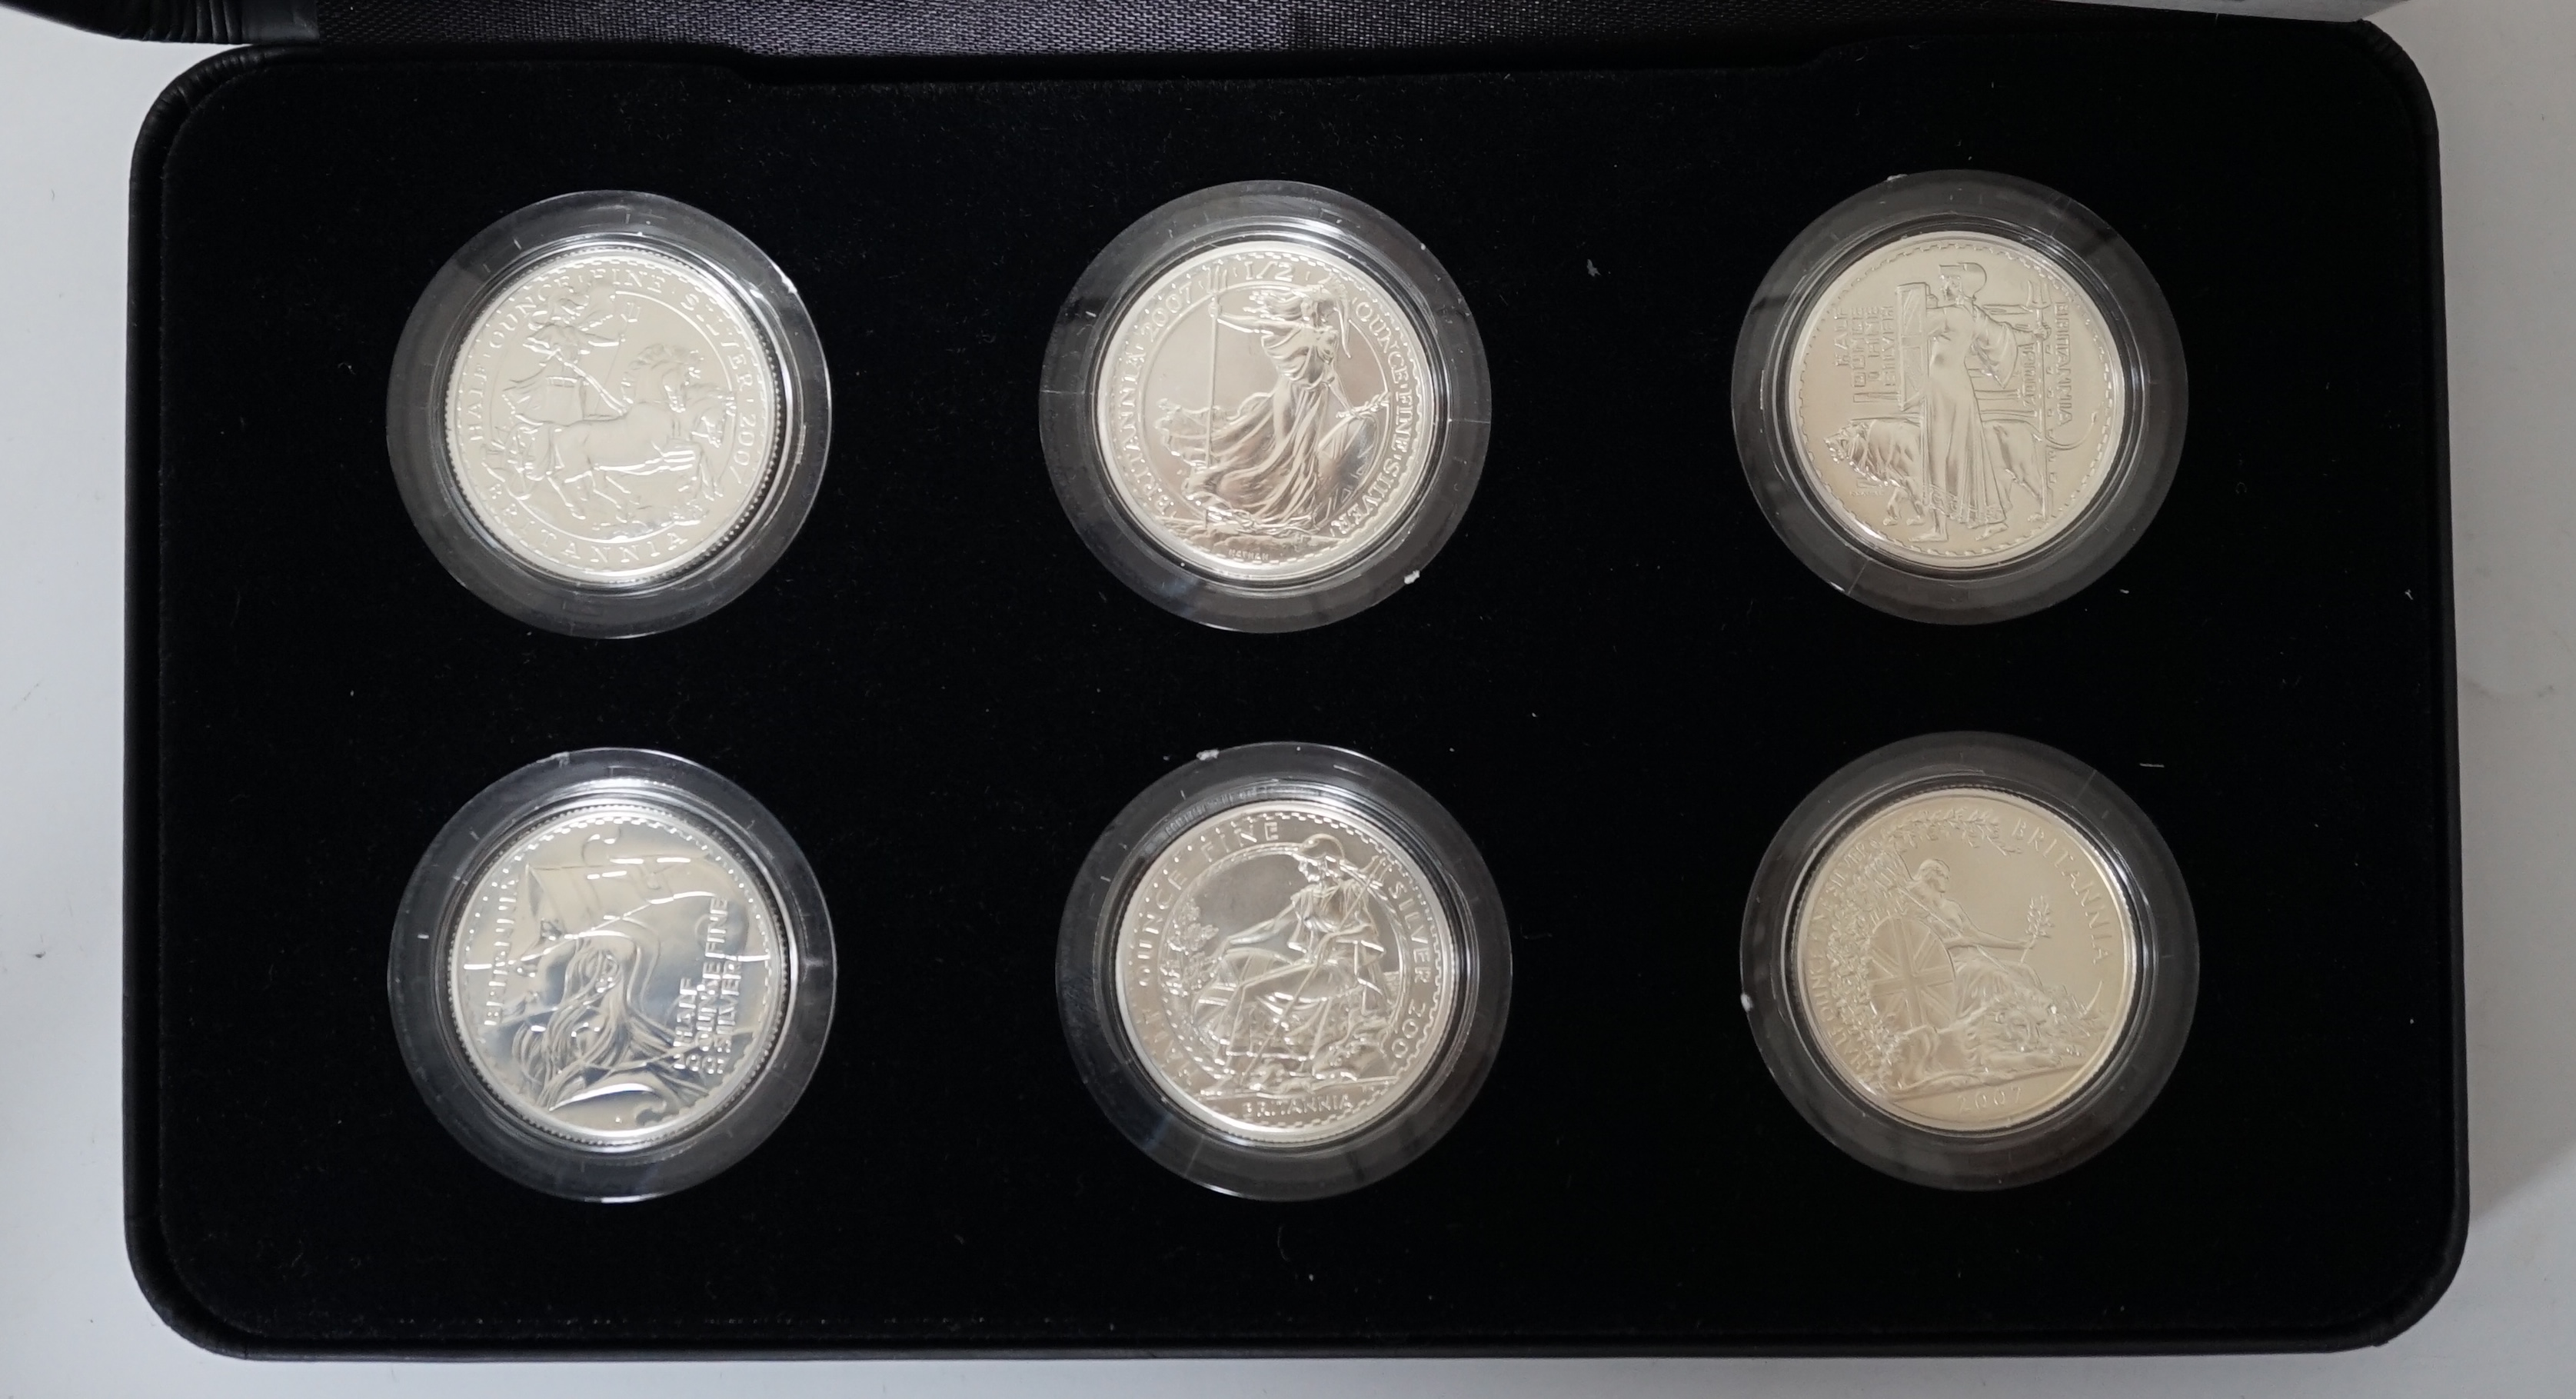 Elizabeth II proof coins, 2007 Britannia 20th Anniversary silver proof one pound collection, cased with certificate